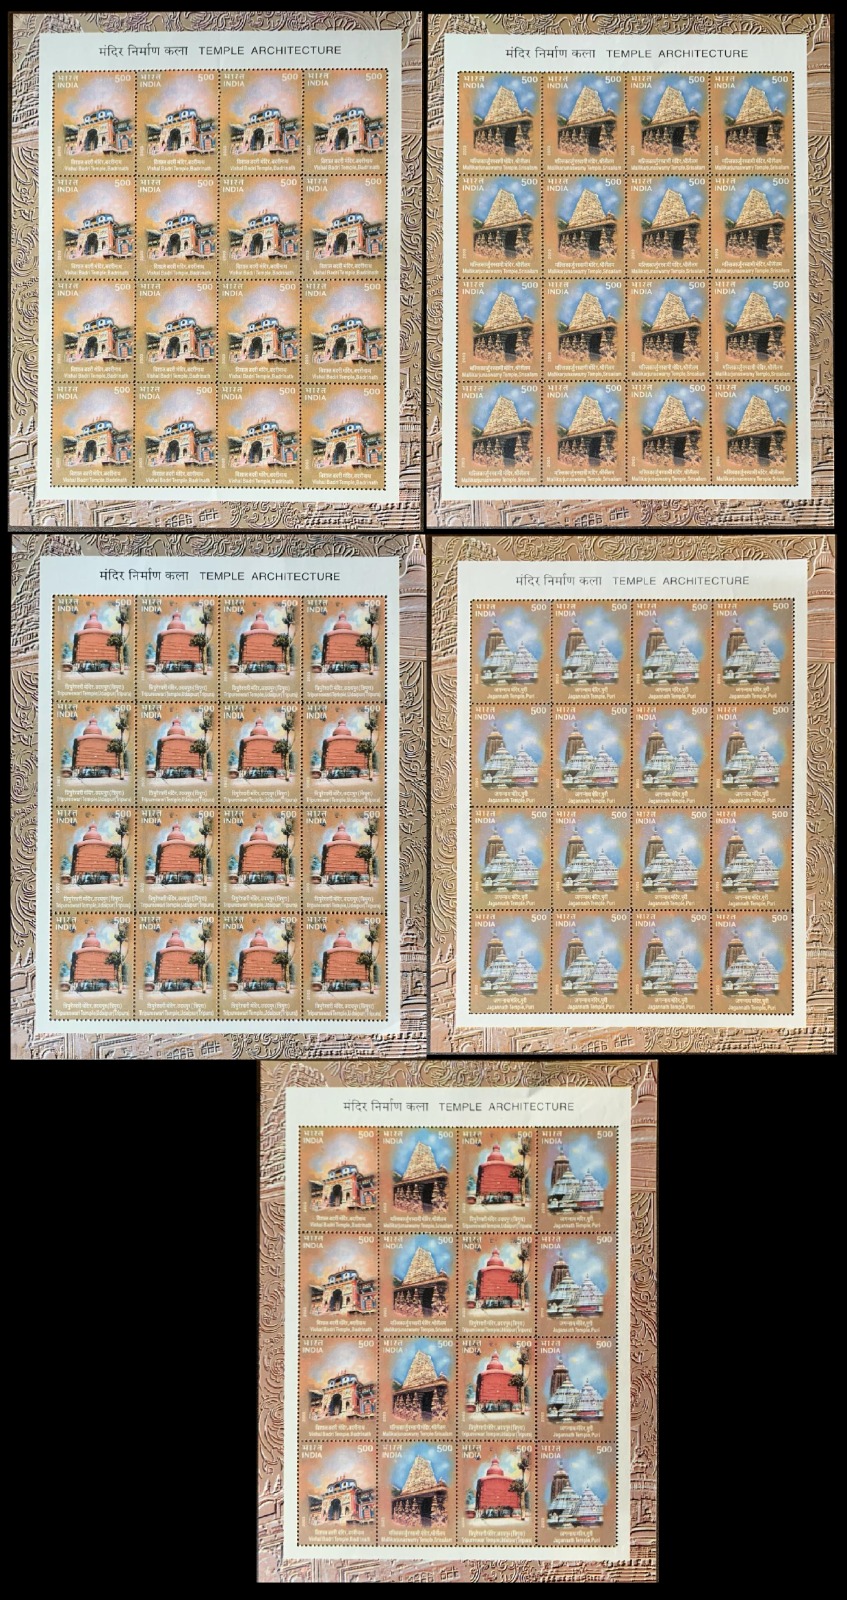 India 2003 Temple Architecture Set of 5 Full Sheet